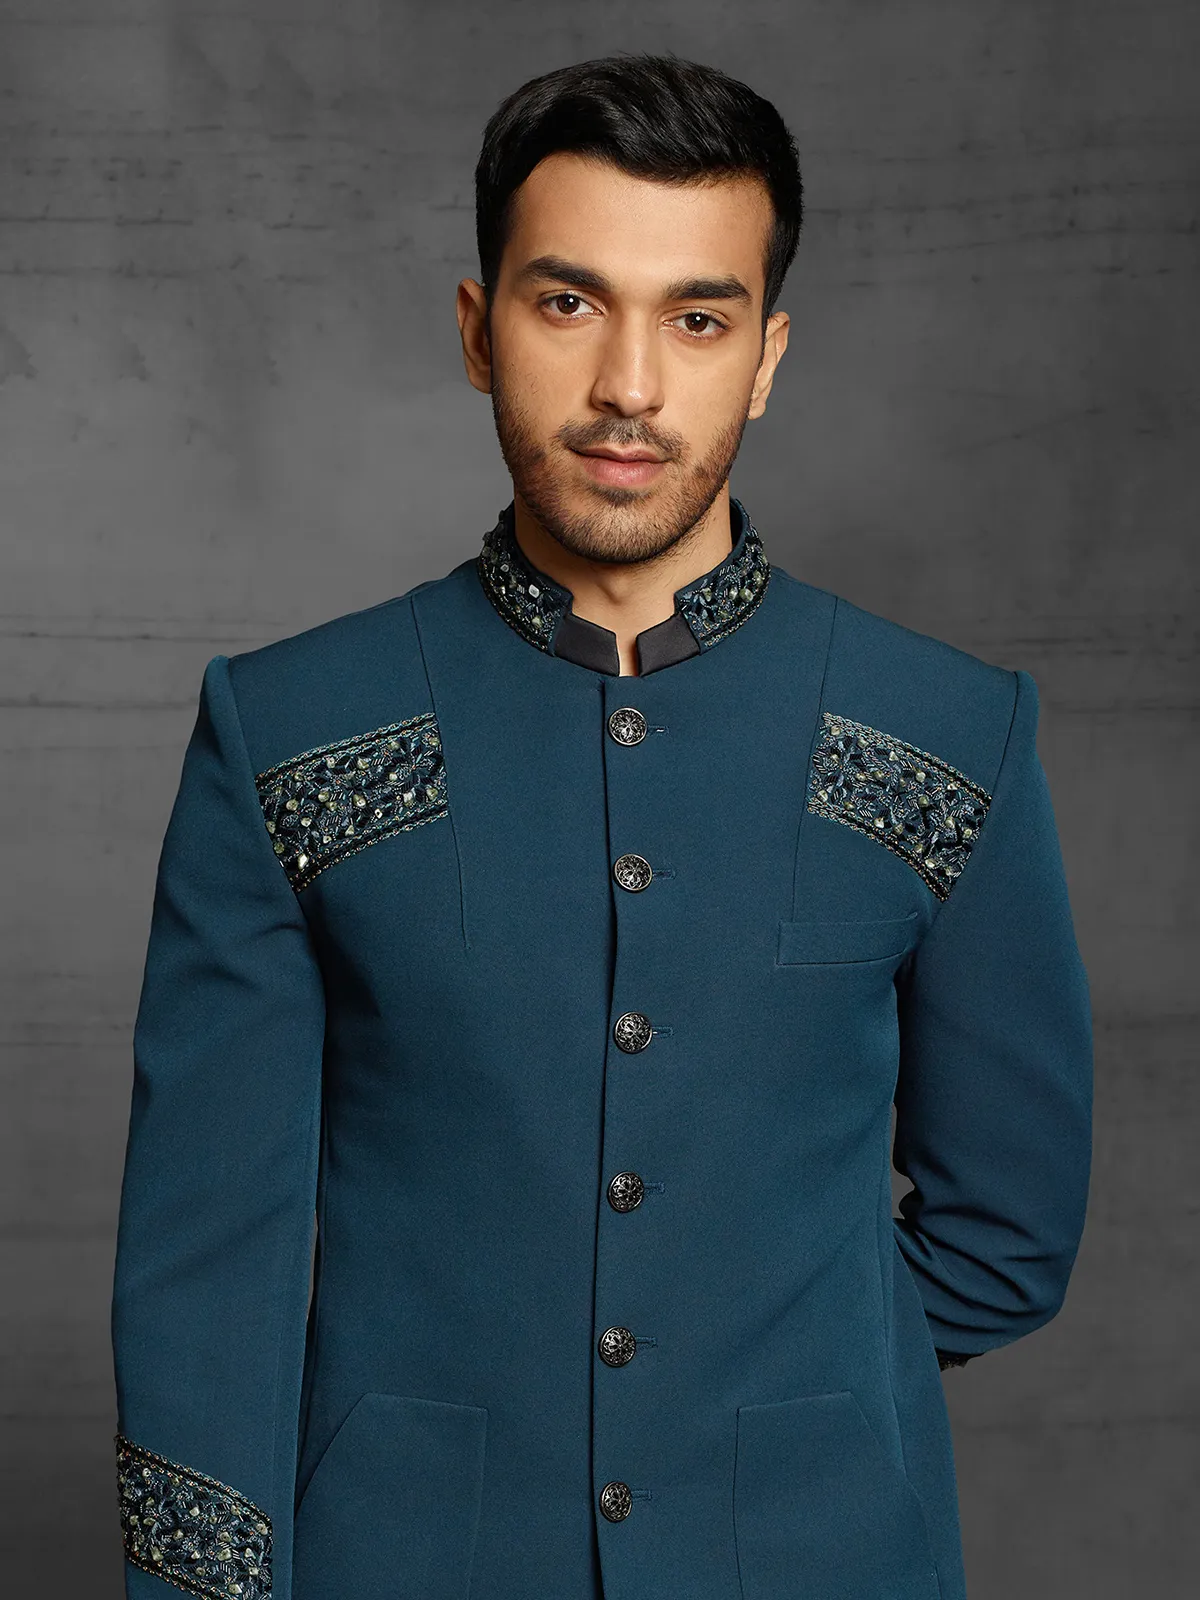 Terry rayon jodhpuri suit in teal blue color